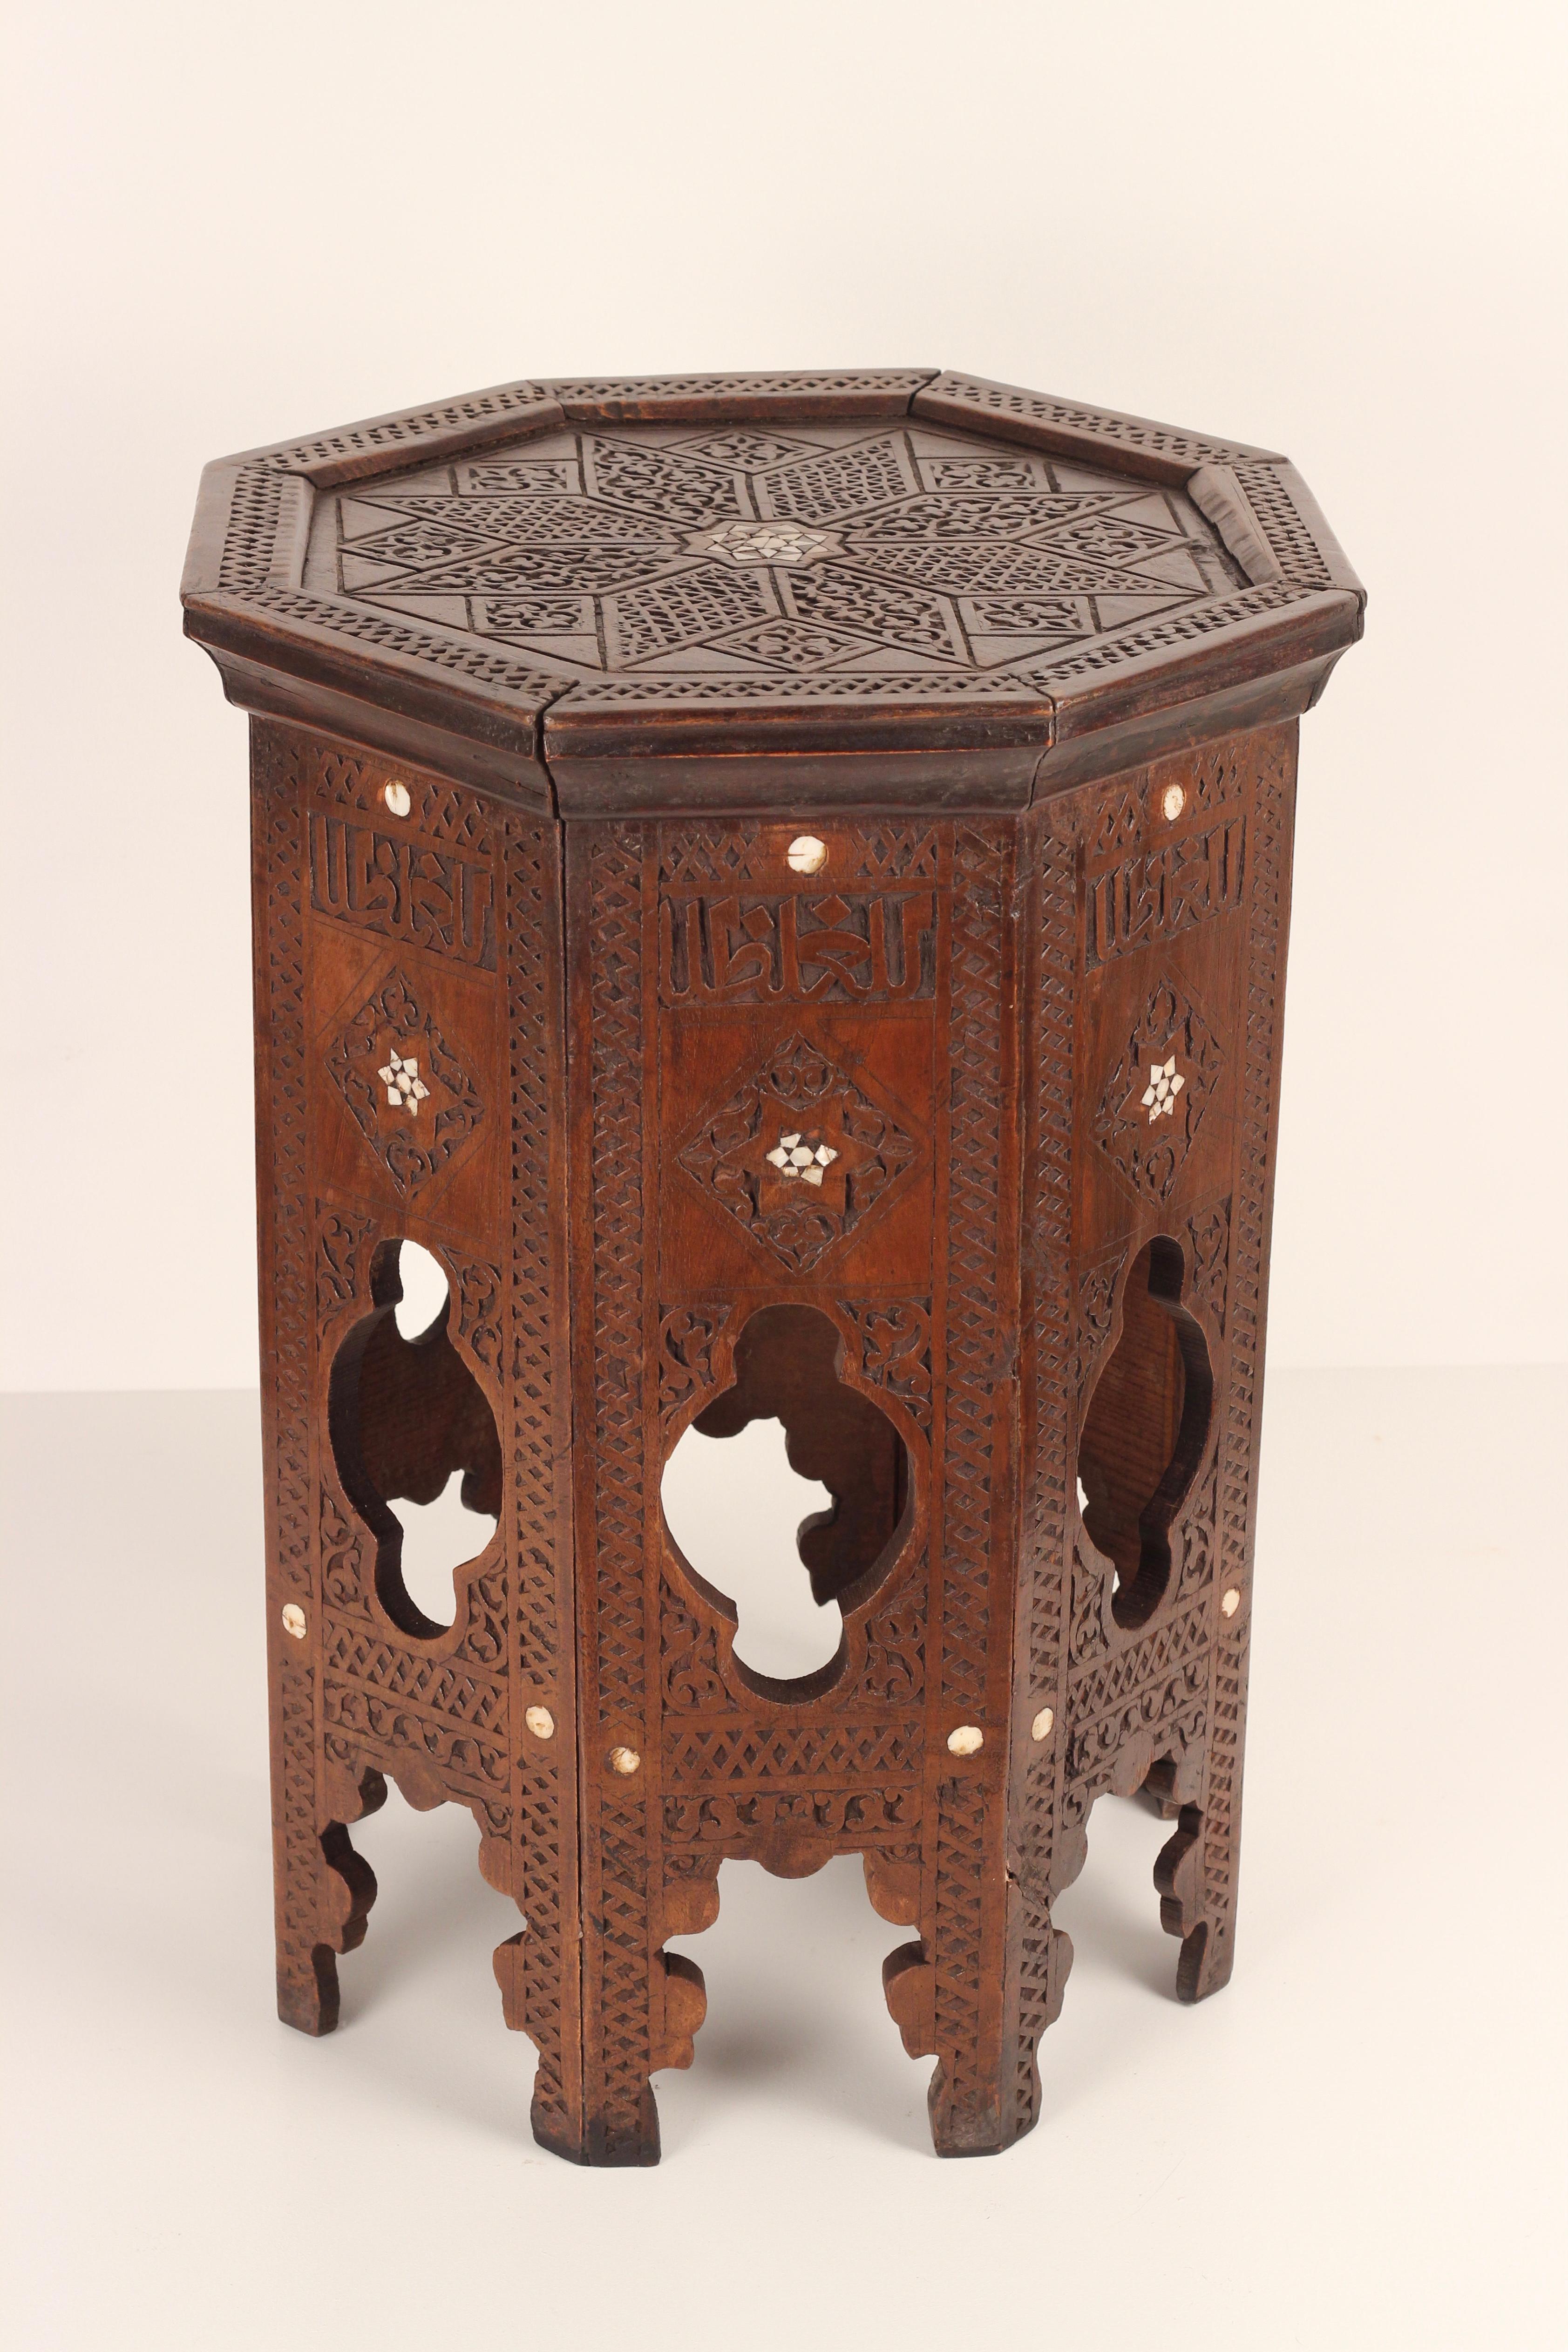 Antique Ottoman side table made around the end of the 19th century from Northern Africa. An ornately carved geometric design with delicate Bone inlay flowers in the Style of the Ottomans. This Hexagonal table serves as a functional and practical